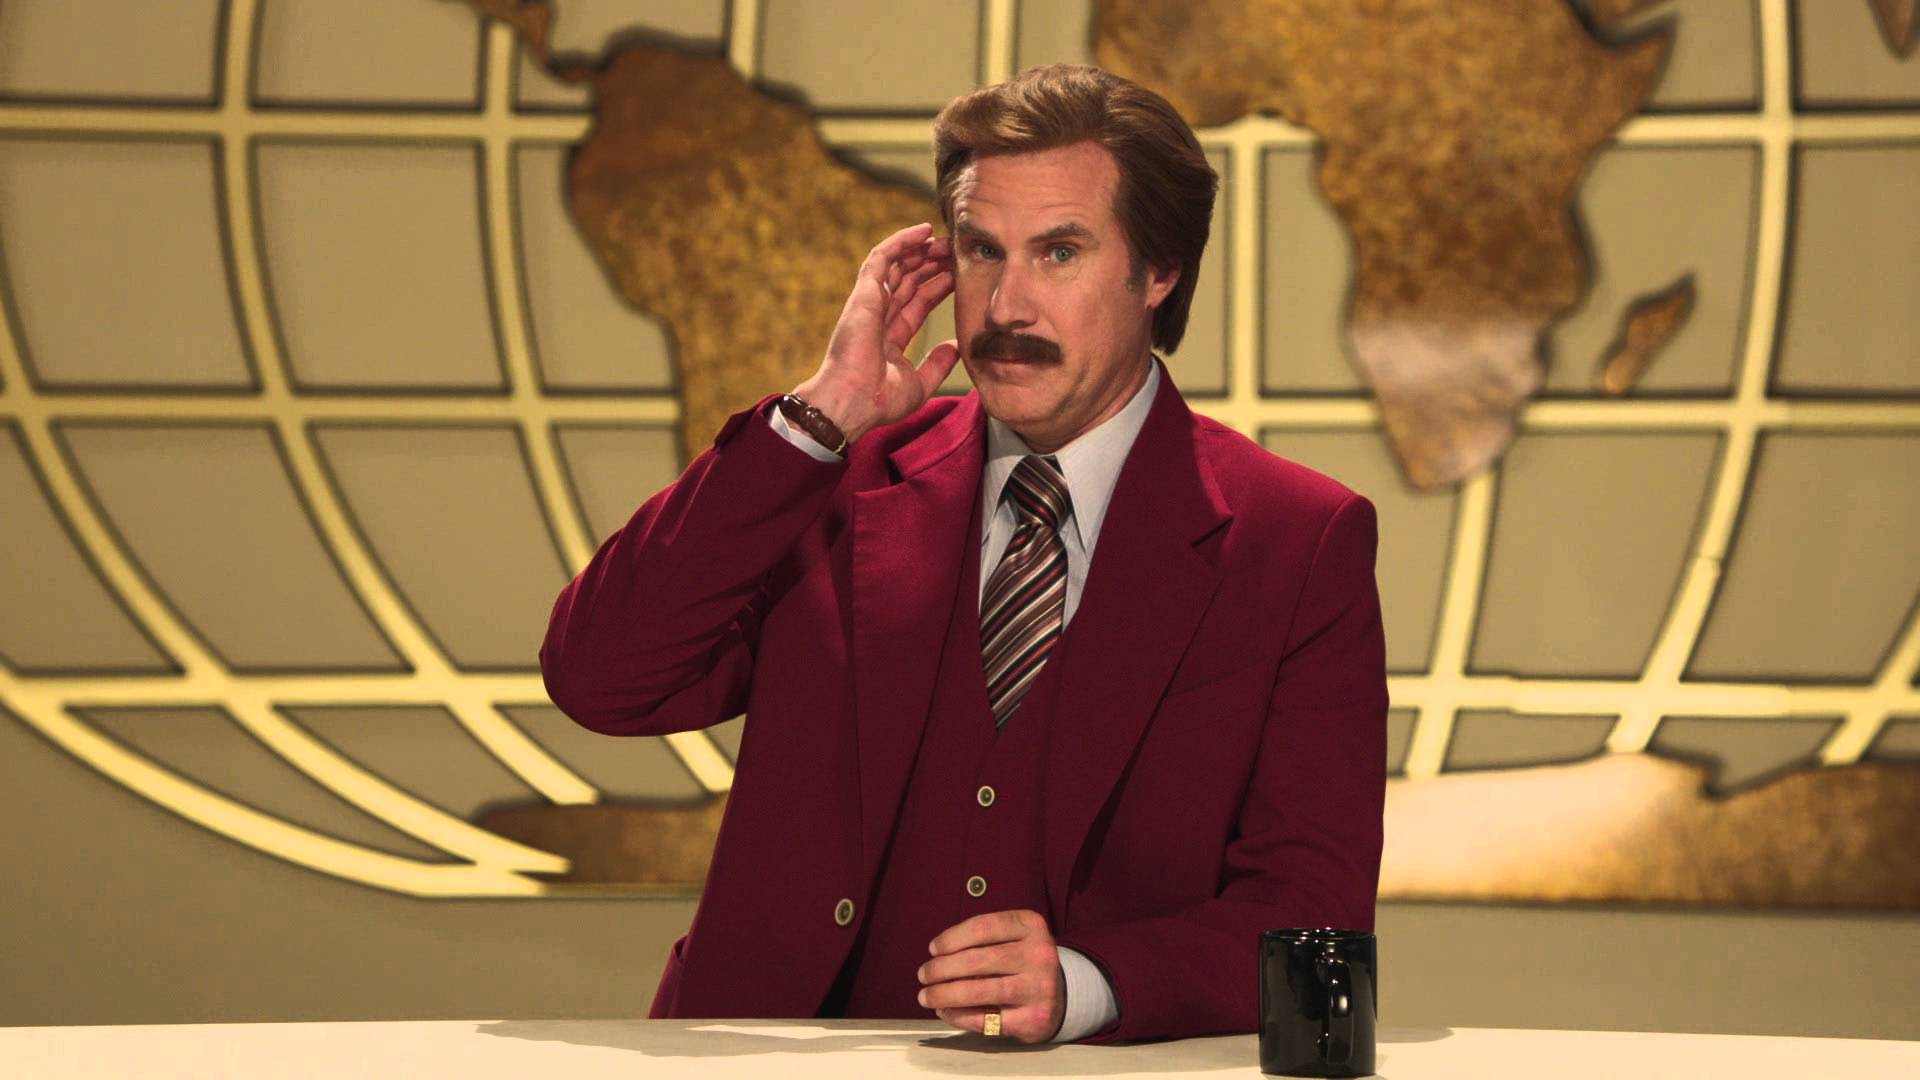 1920x1080 Ron Burgundy This Just In Blank Template Imgflip